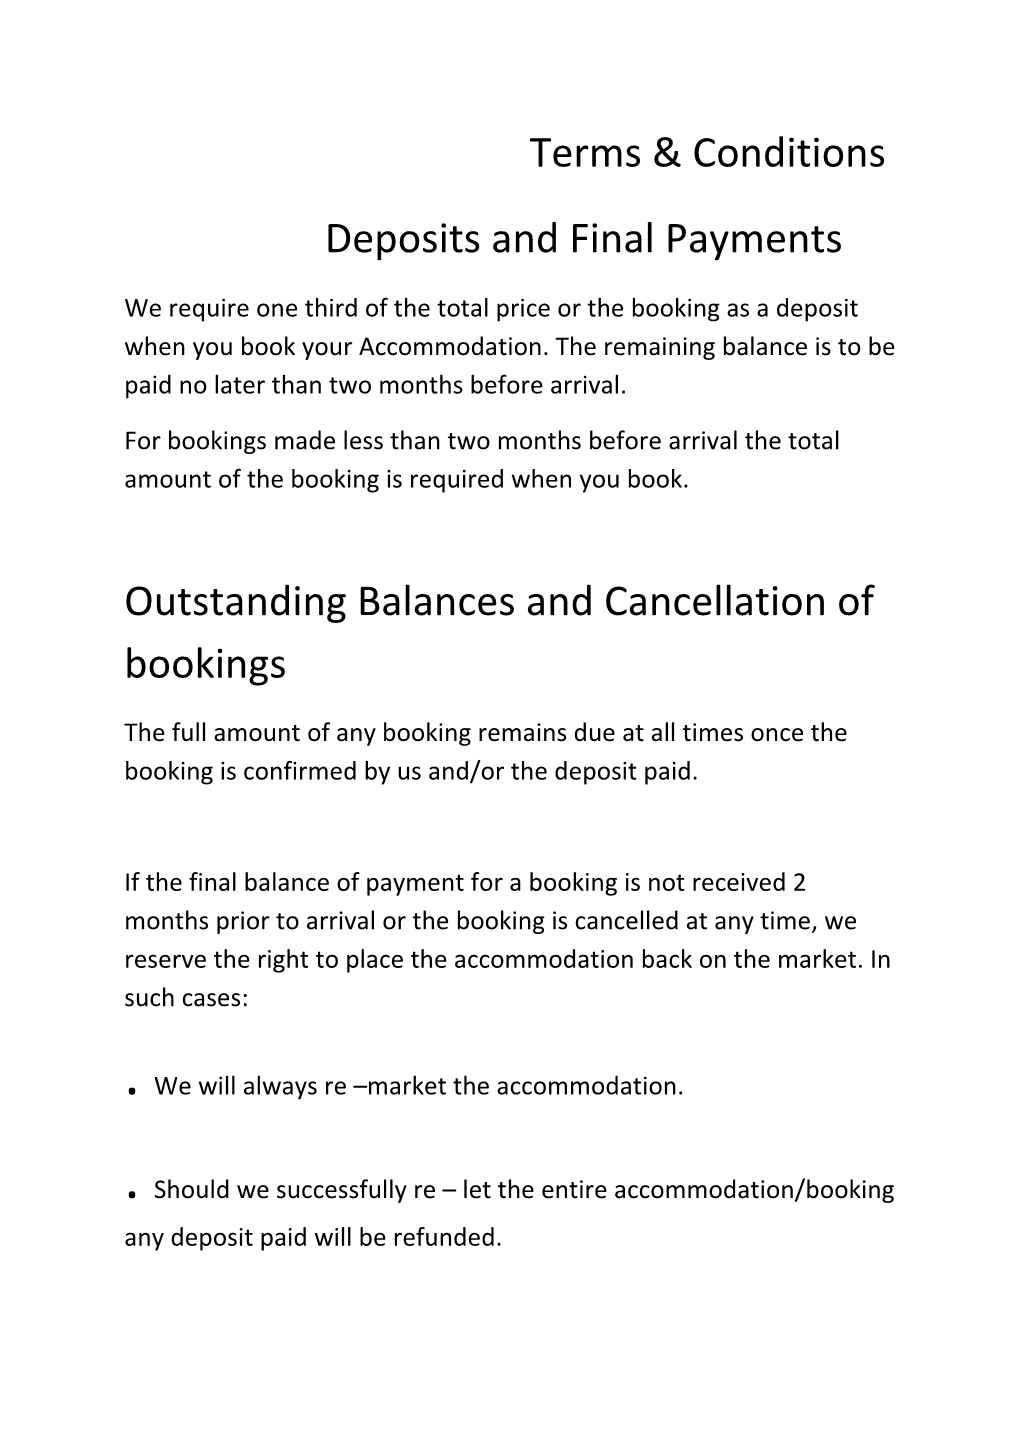 Deposits and Final Payments